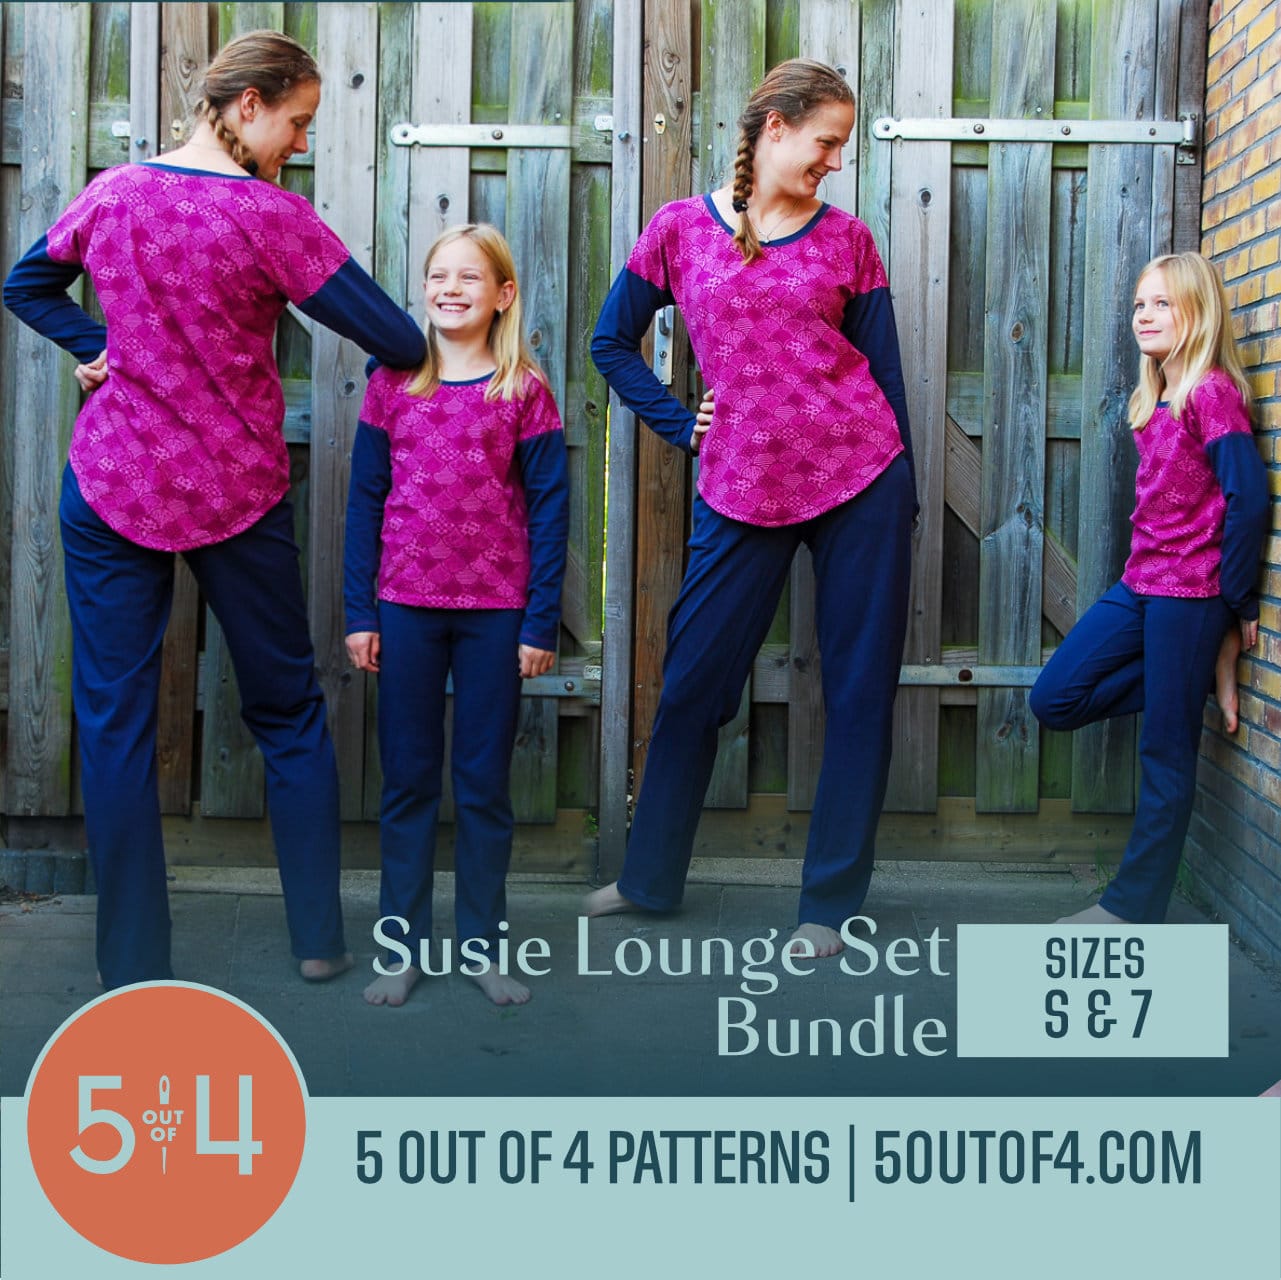 Susie Lounge Set Bundle - 5 out of 4 Patterns